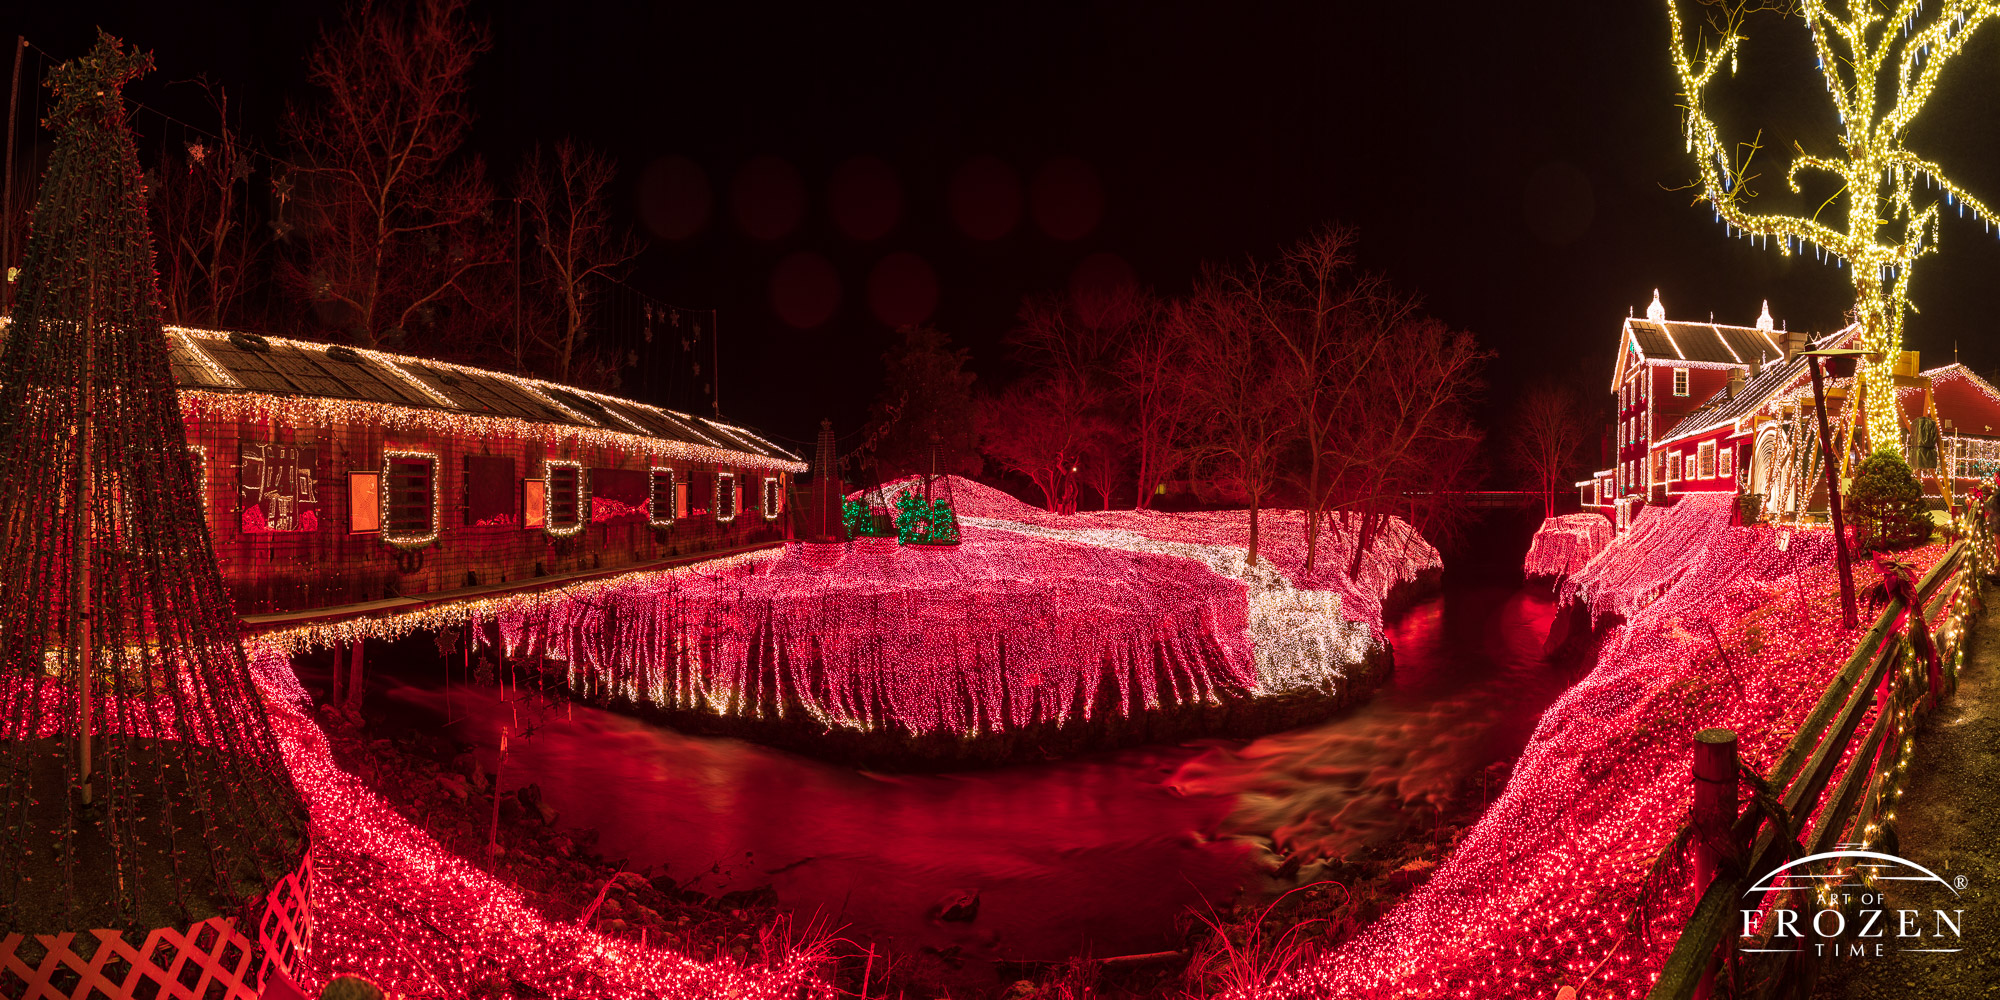 A nightscape of a water-power grist mill surrounding gorge decorated in 4 million, red and white Christmas lights